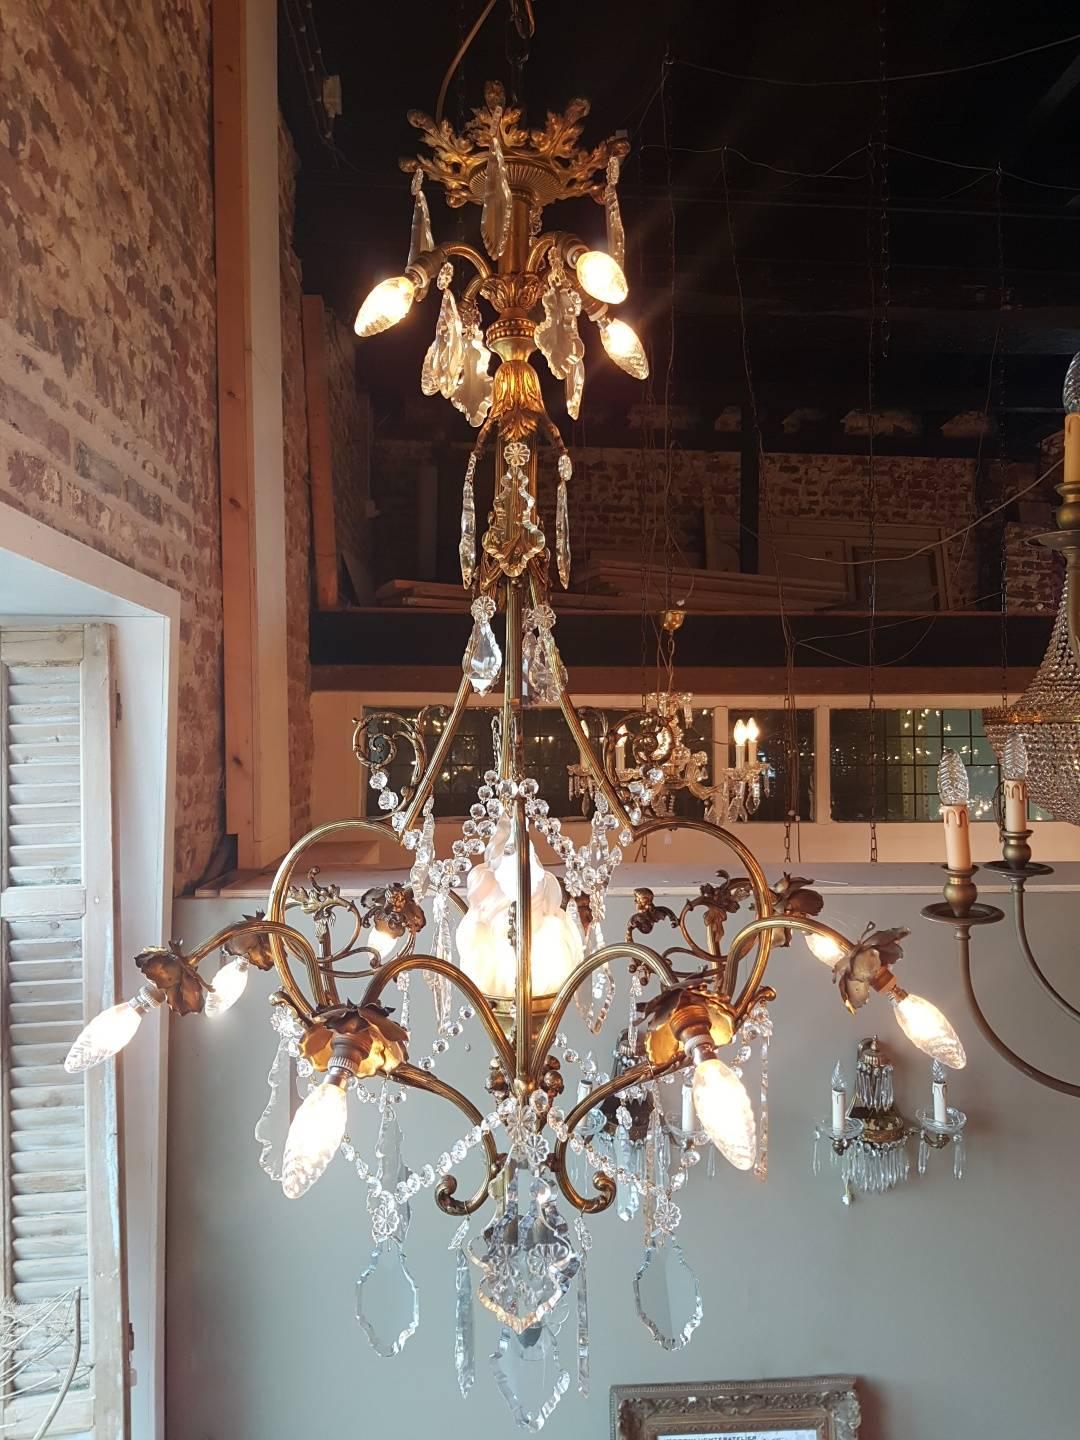 Original French Chandelier with four lights in the top, eight lights are bending down covered with delicate leaves. One light in the middle covered by a big frosted Flame of Glass. In the center under the Flame are four Angels of Bonze and four